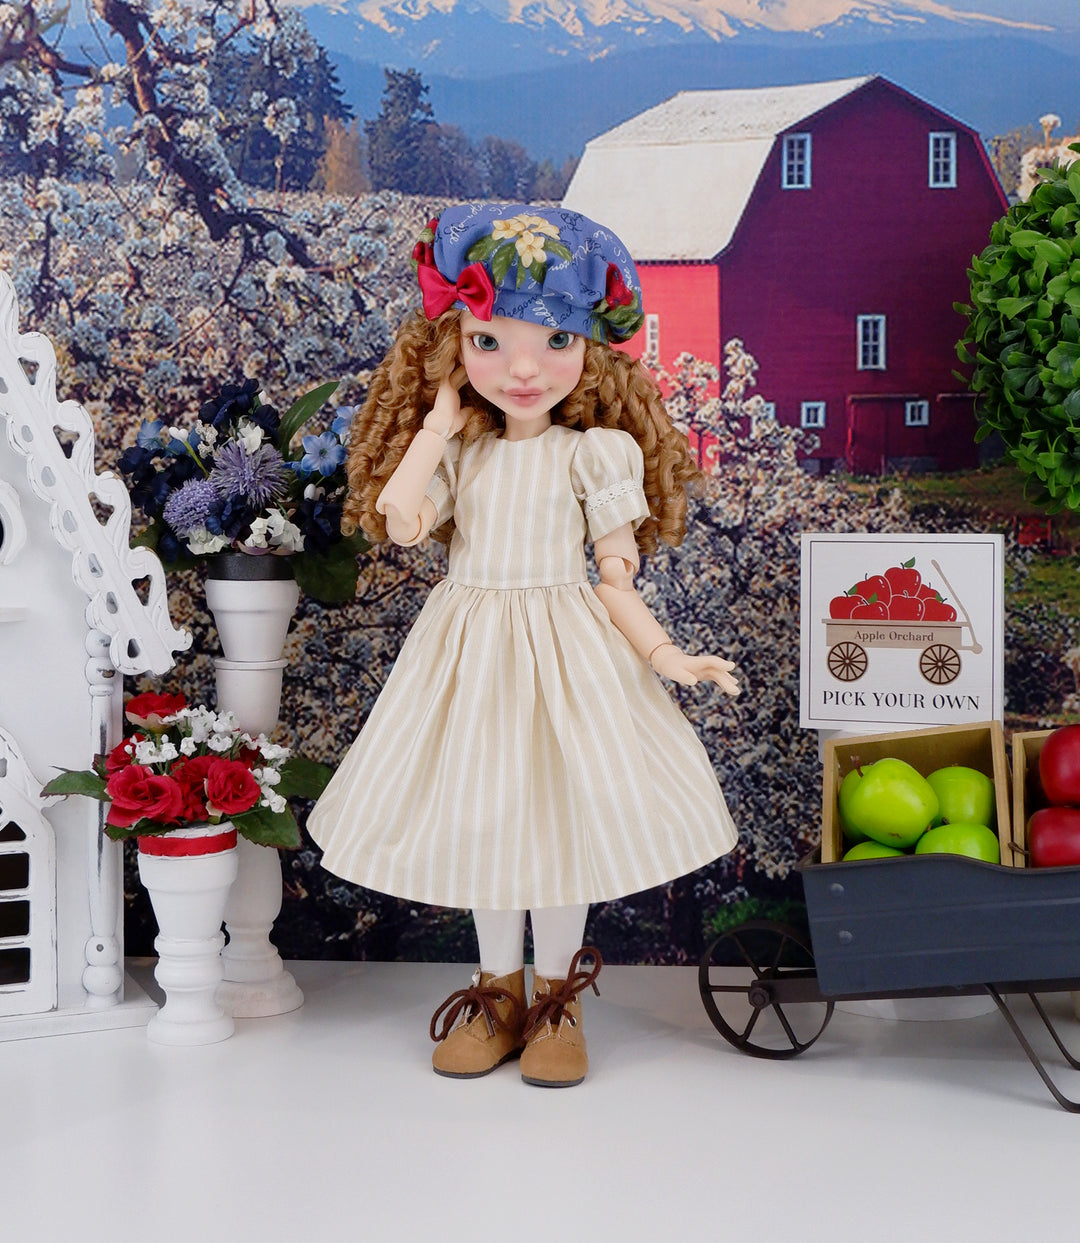 Pacific Northwest - dress & pinafore with boots for Anderson Art Dolls BJD